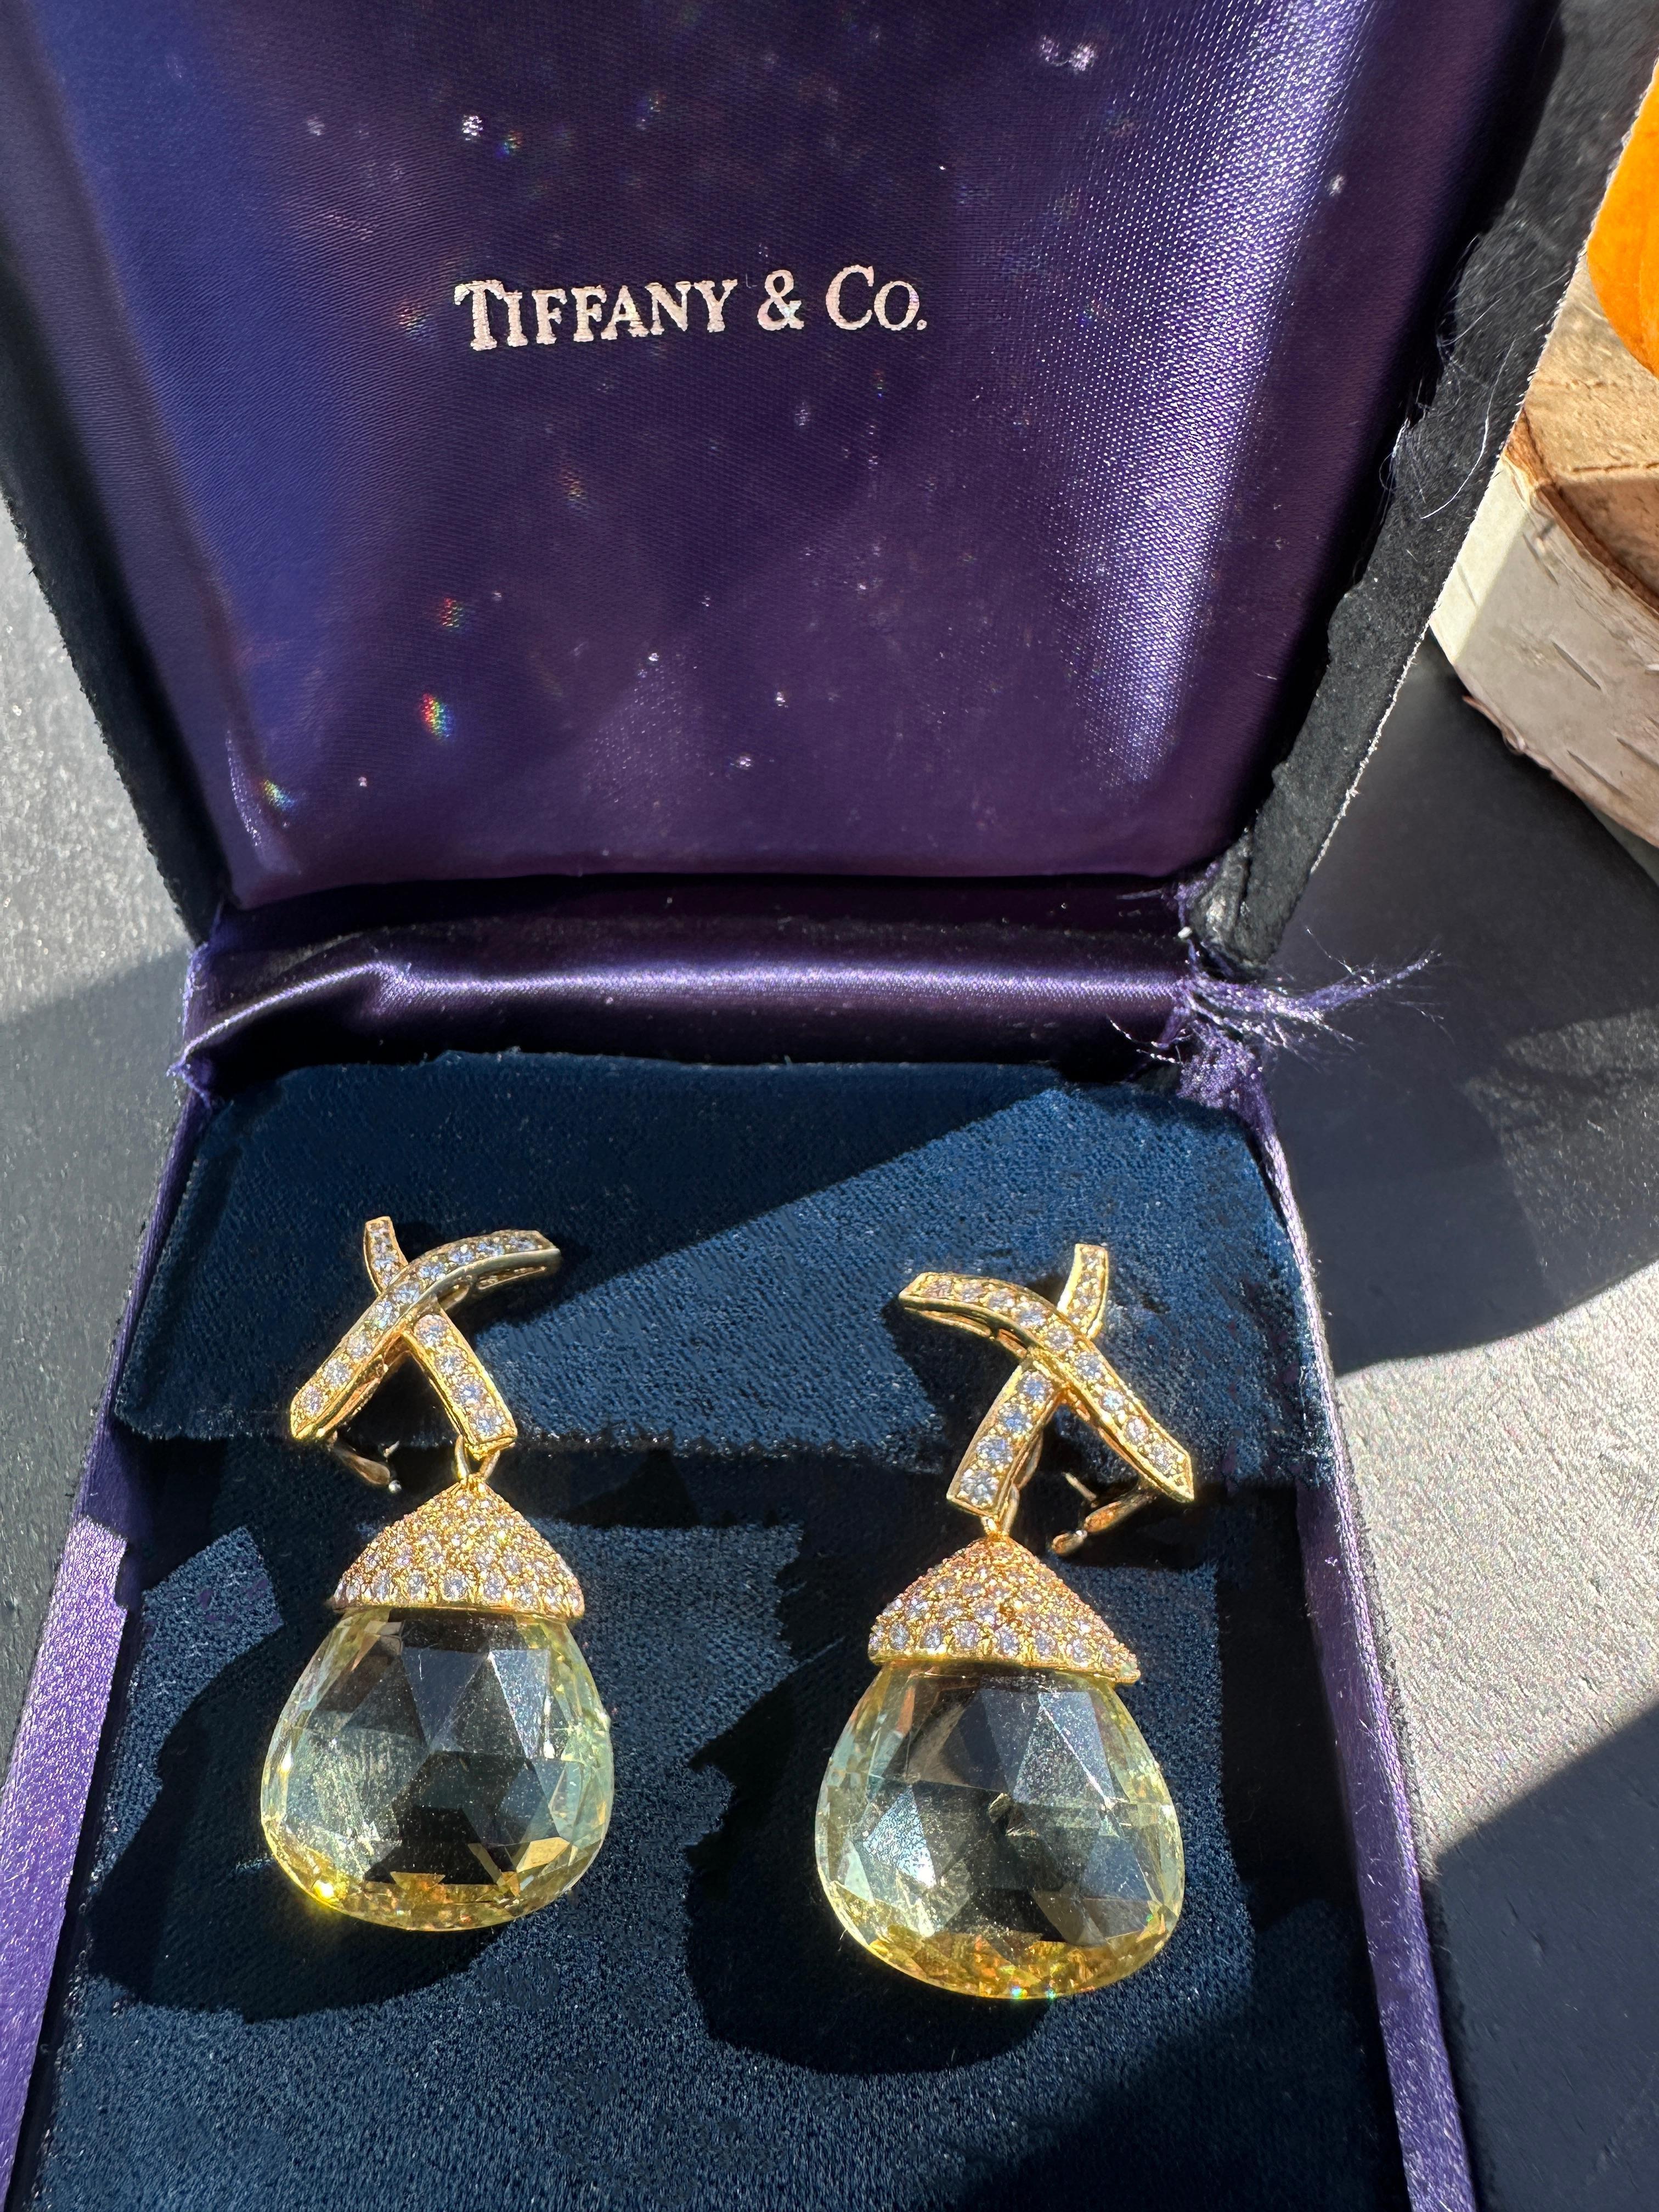 18k TIffany Diamond and Lemon Citrine Day-Night Earrings Signed Paloma Picasso For Sale 2